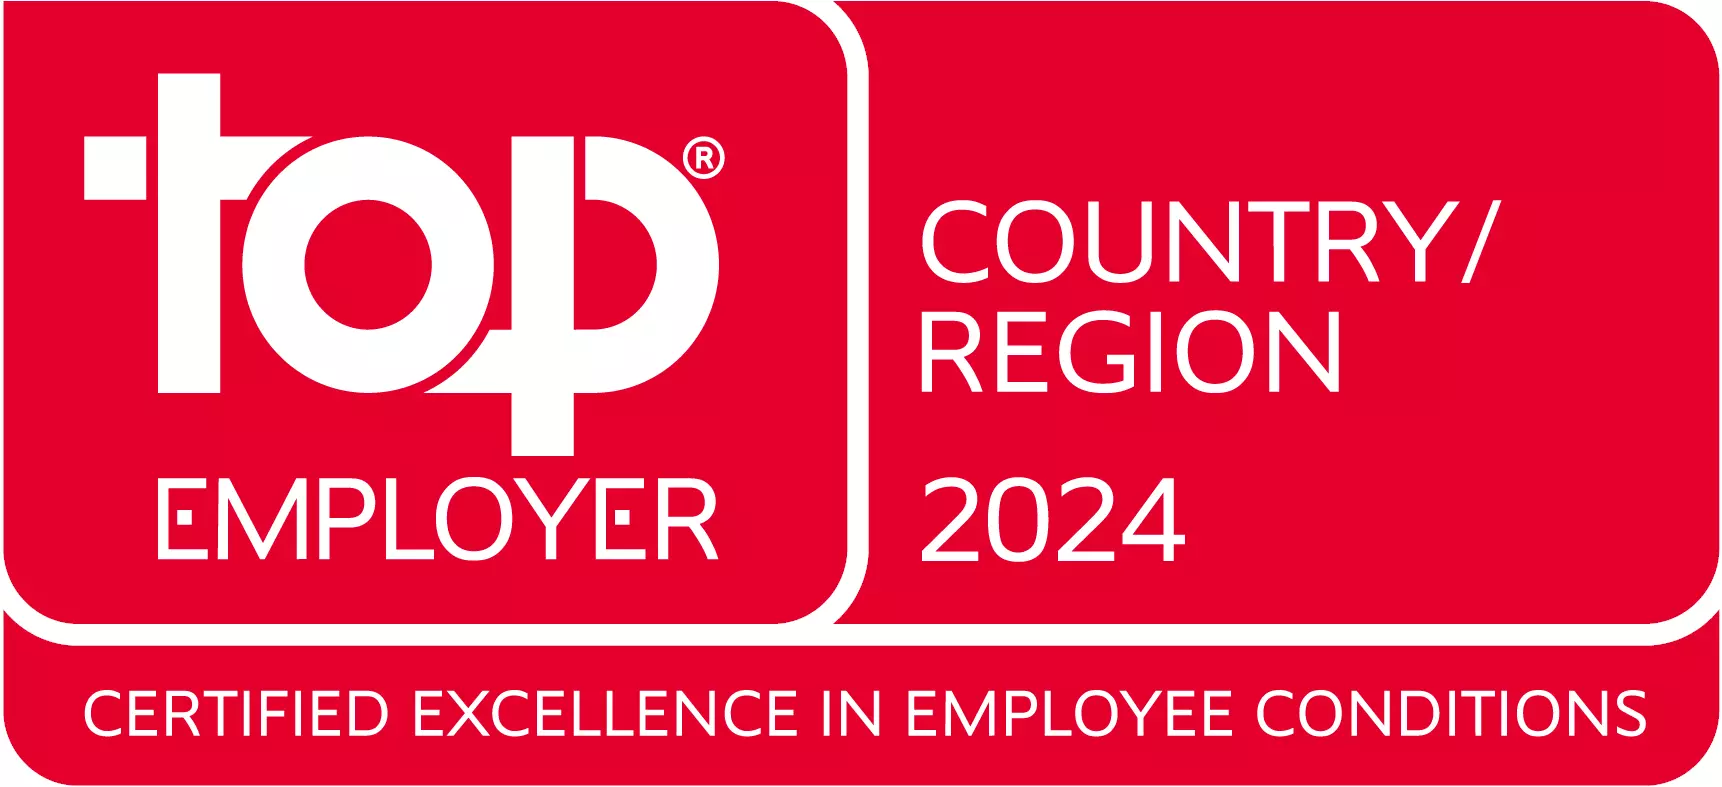 Top_Employer_Country-Region_2024.png